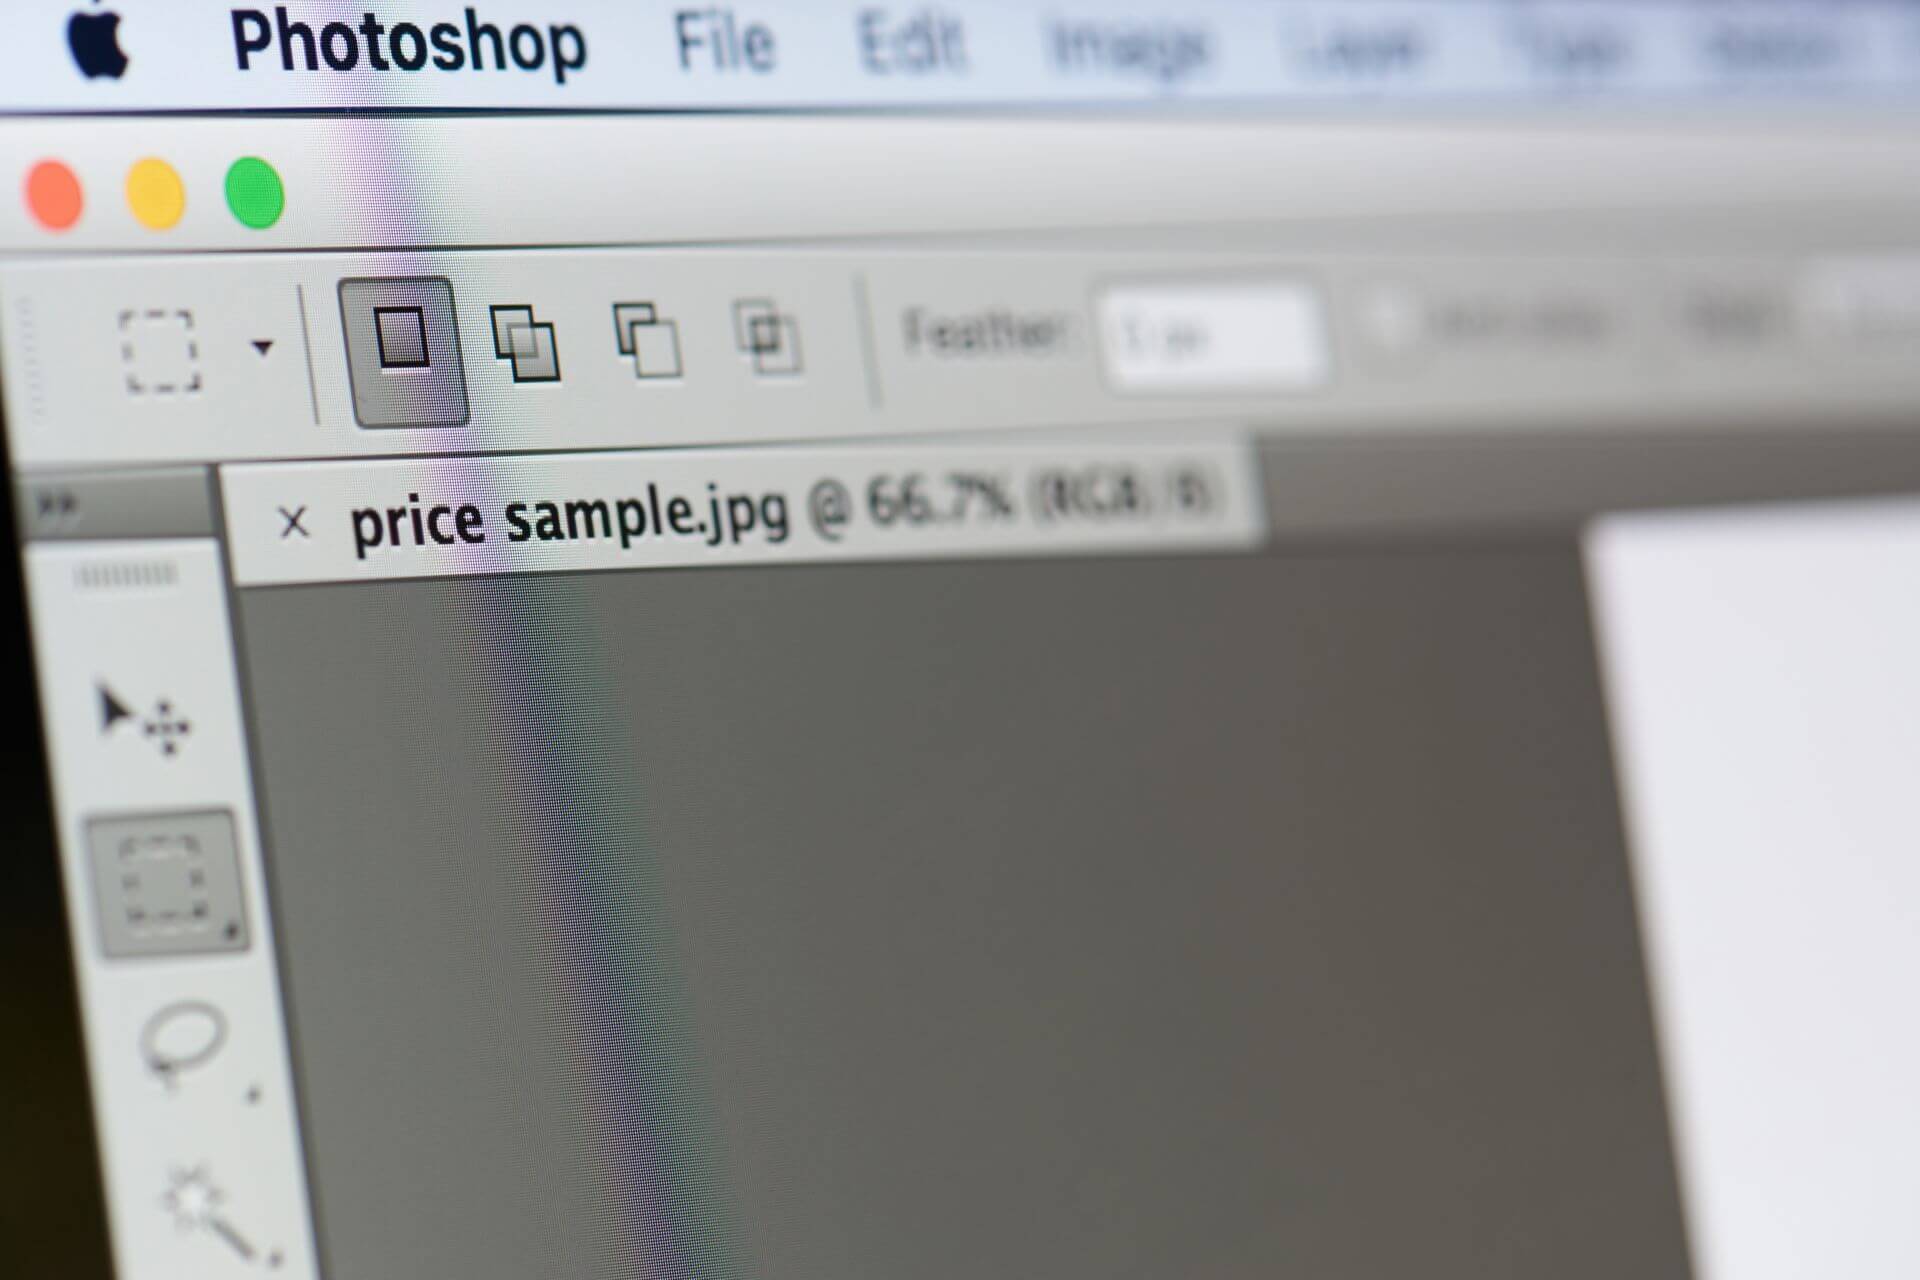 How to use Photoshop in browser